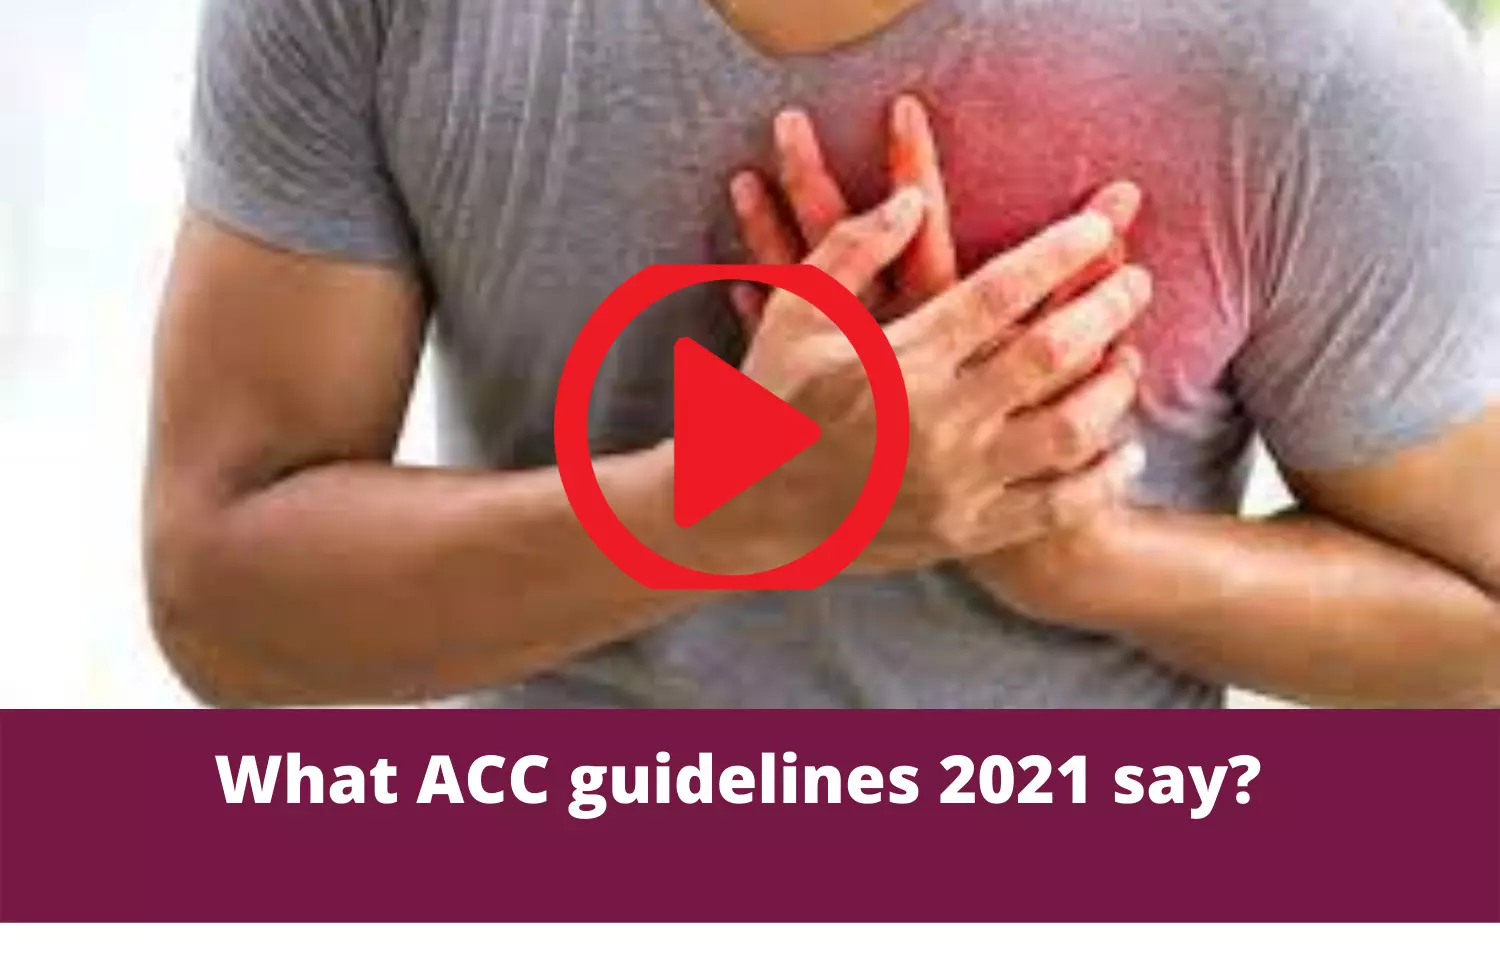 Guideline update ACC 2021: Acute chest pain